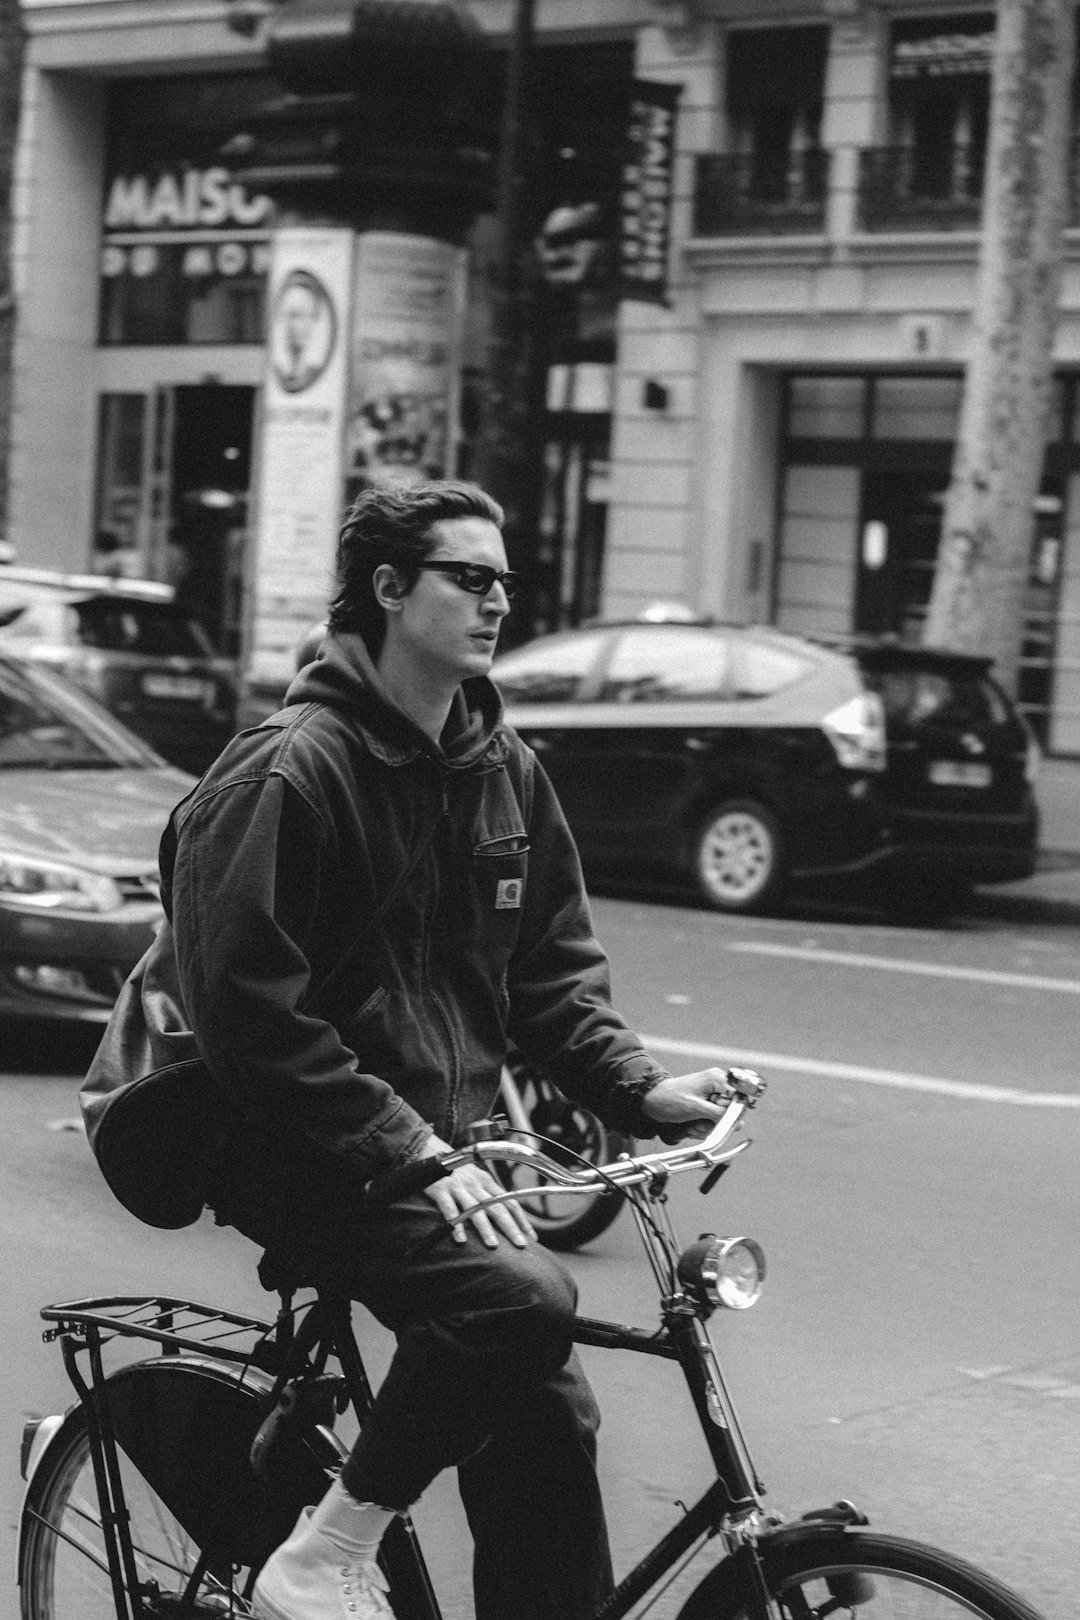 man in black jacket riding on motorcycle in grayscale photography